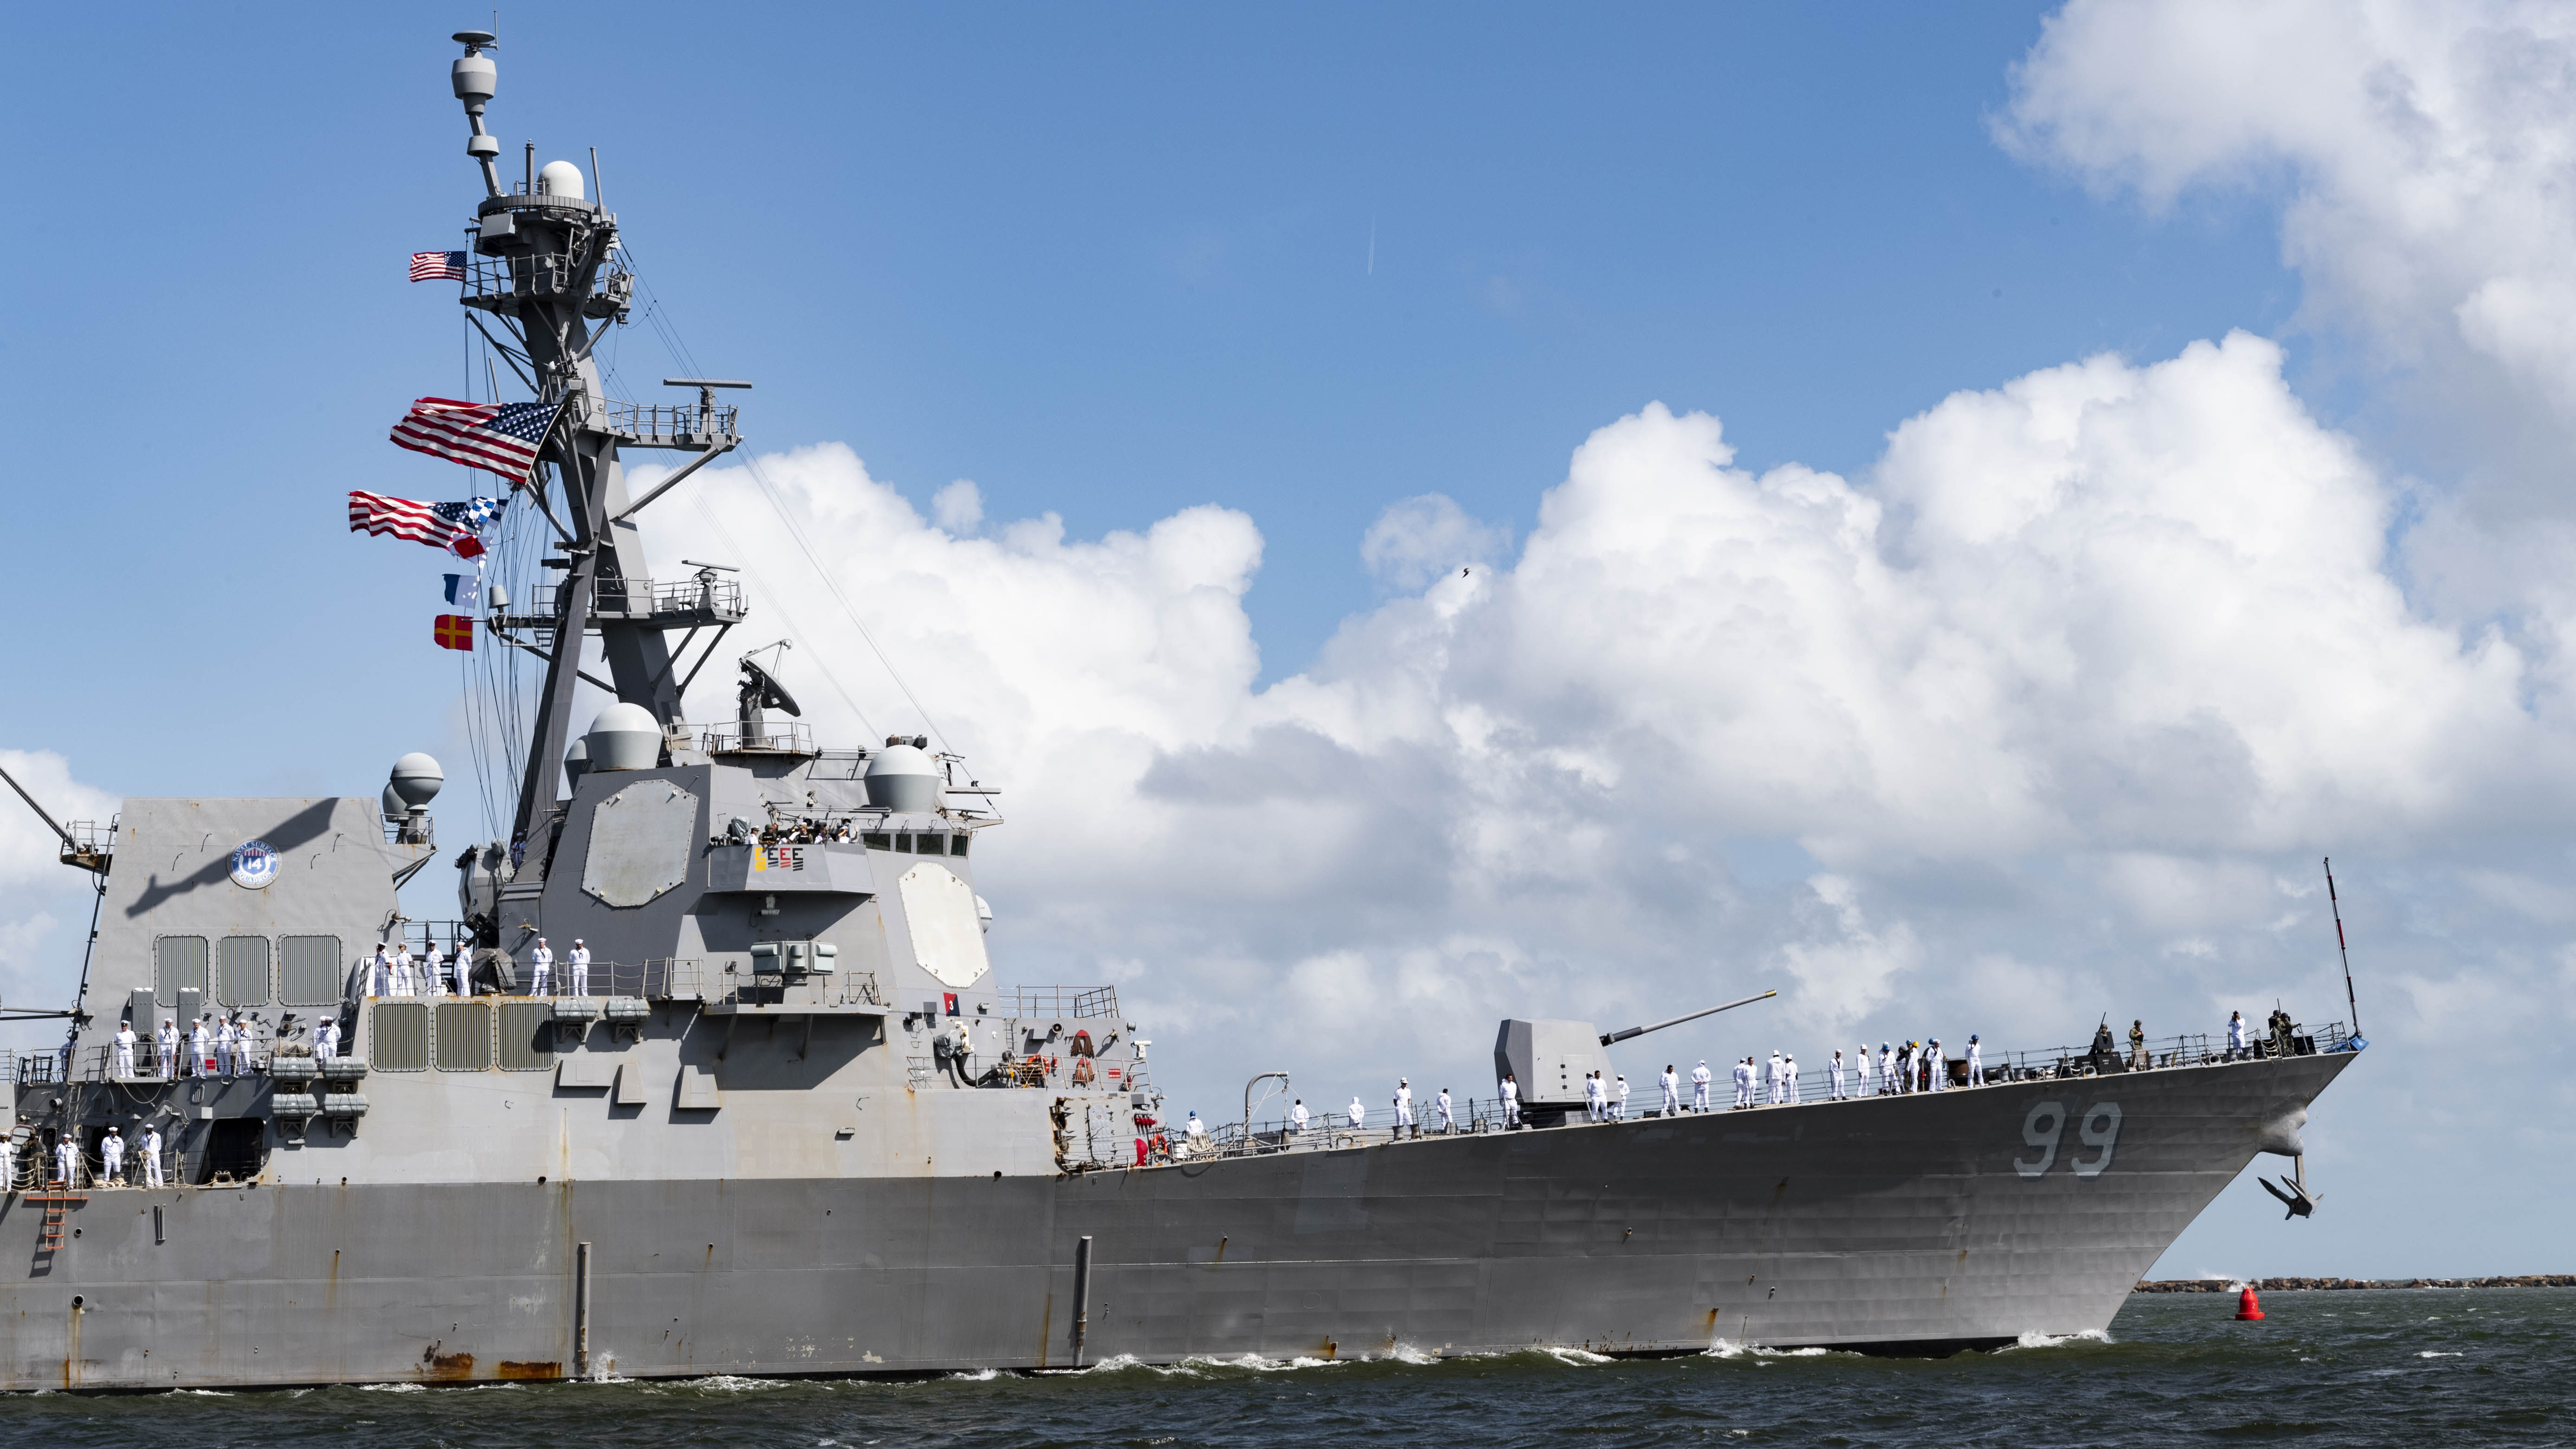 Mayport, Fla. (Sept. 14, 2019) The Arleigh Burke-class guided-missile destroyer USS Farragut (DDG 99) departs Naval Station Mayport. Farragut is among ships and units from the Harry S. Truman Carrier Strike Group that formed a Surface Action Group (SAG) and are deploying from their East Coast homeports of Norfolk, Va. and Mayport, Fla.  Photo by Mass Communication Specialist 2nd Class Anderson [  ].